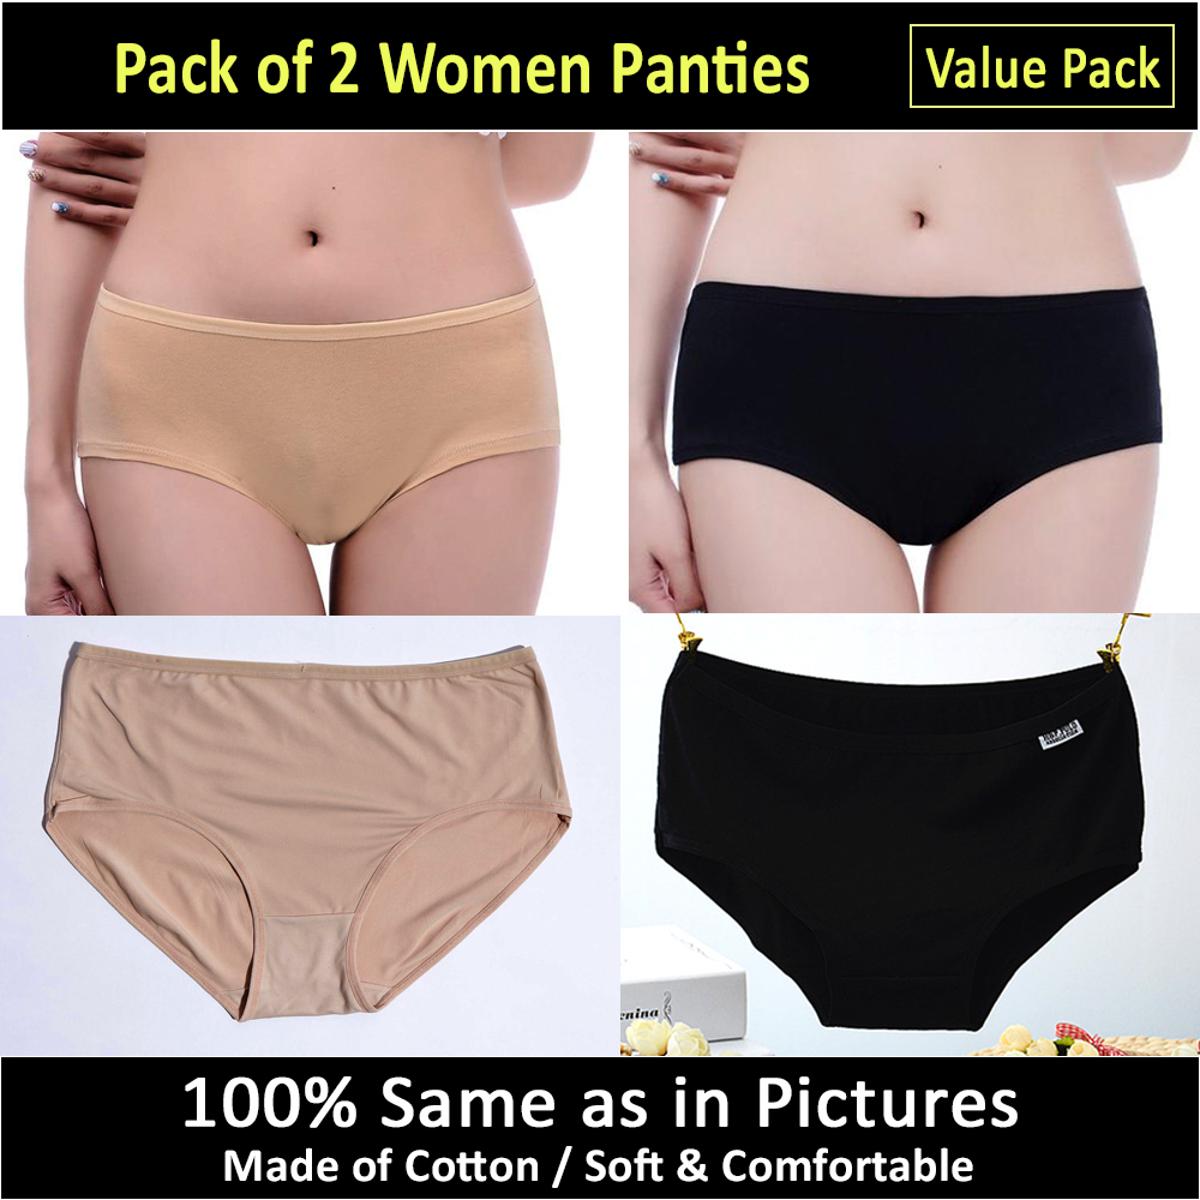 Buy SHAPERX Women's Cotton Underwear High Waist Stretch Briefs Soft Underpants  Ladies Full Coverage Panties 4 Pack (XS) Multicolour at